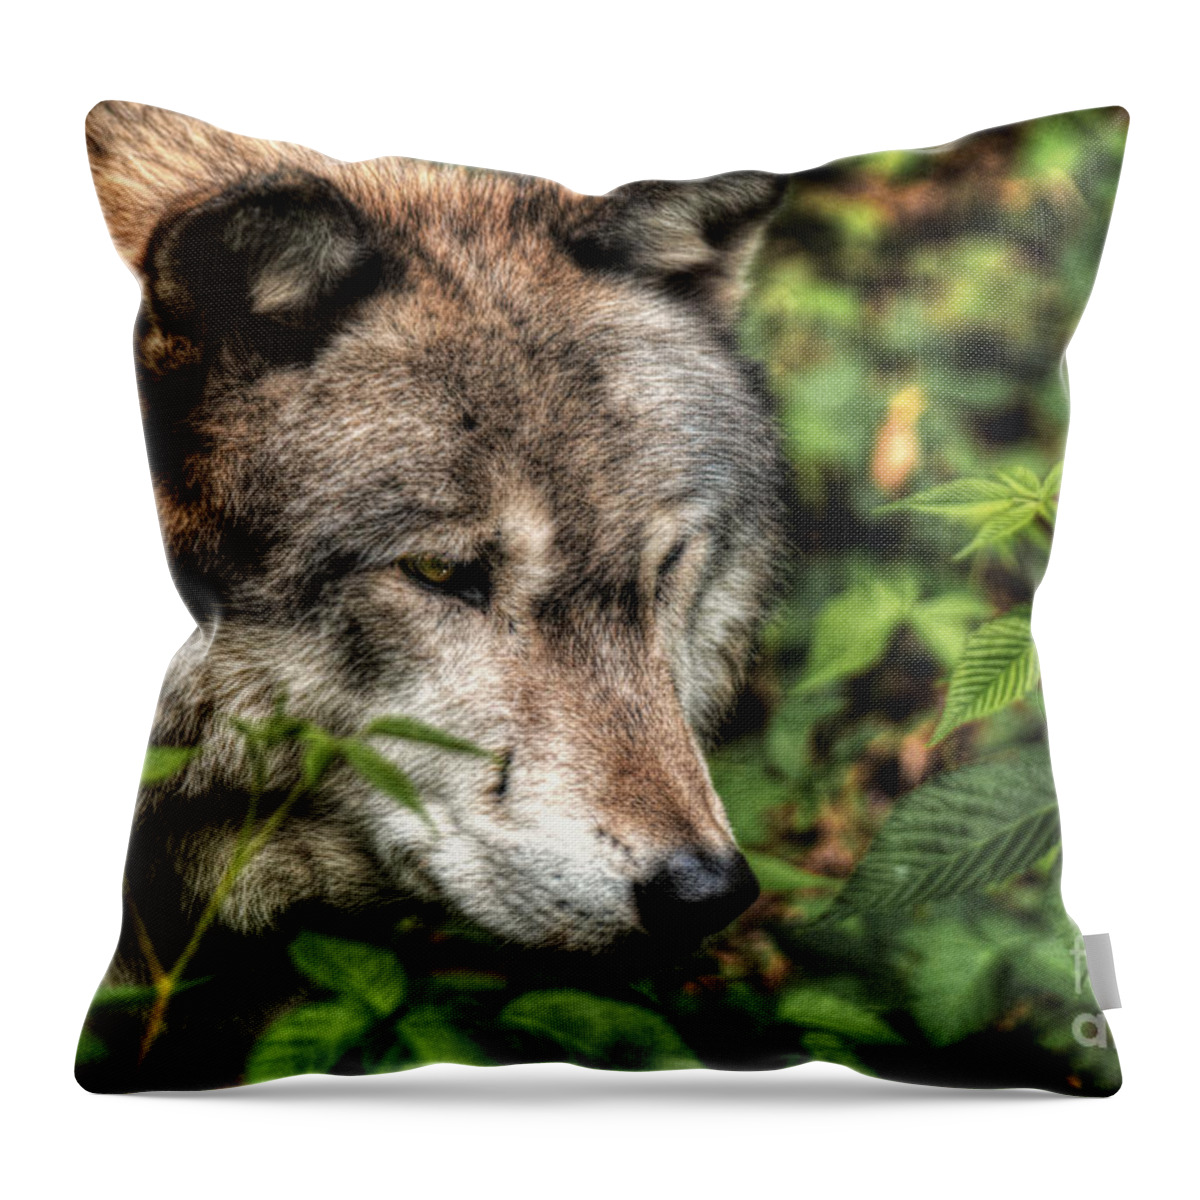 A Senior Citizen Of The Forest Throw Pillow featuring the digital art A Senior Citizen of the Forest by William Fields